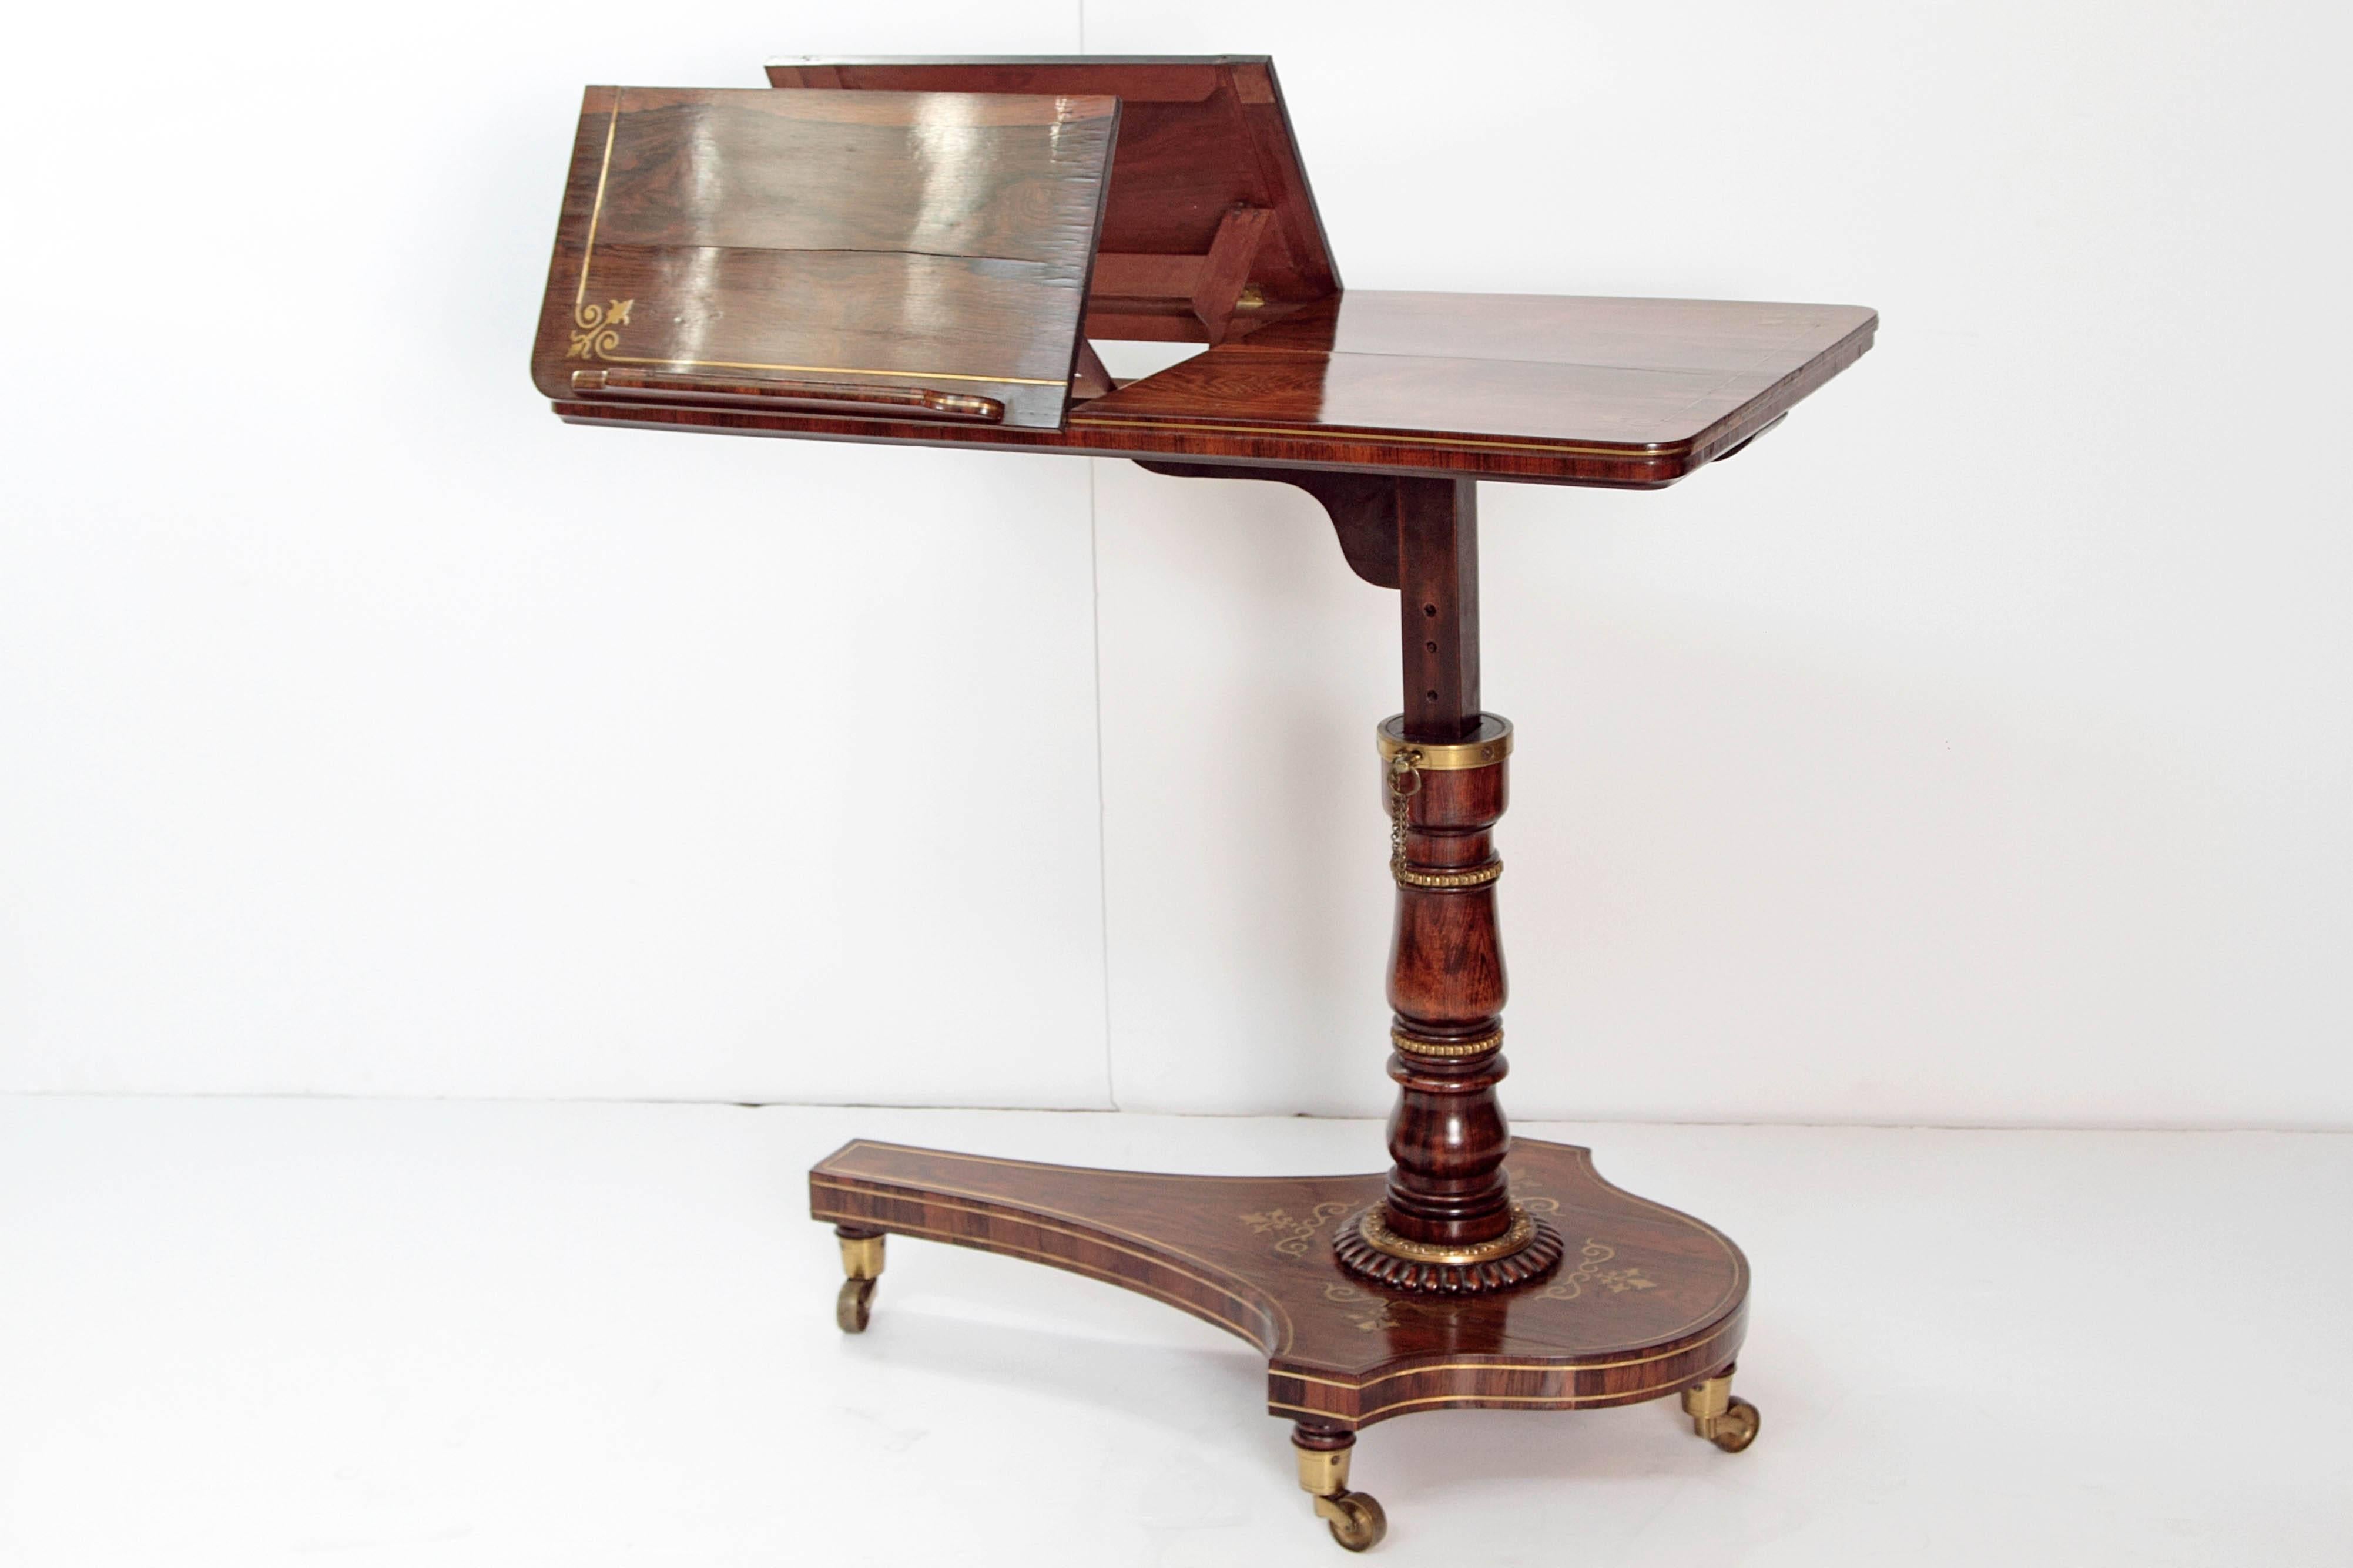 An English Regency adjustable bed table / dual reading stand of rosewood with inlaid brass decoration, rectangular top with rounded corners of bookmatched rosewood, two (2) hinged sections opposite one another each with ratchet easels for a book or